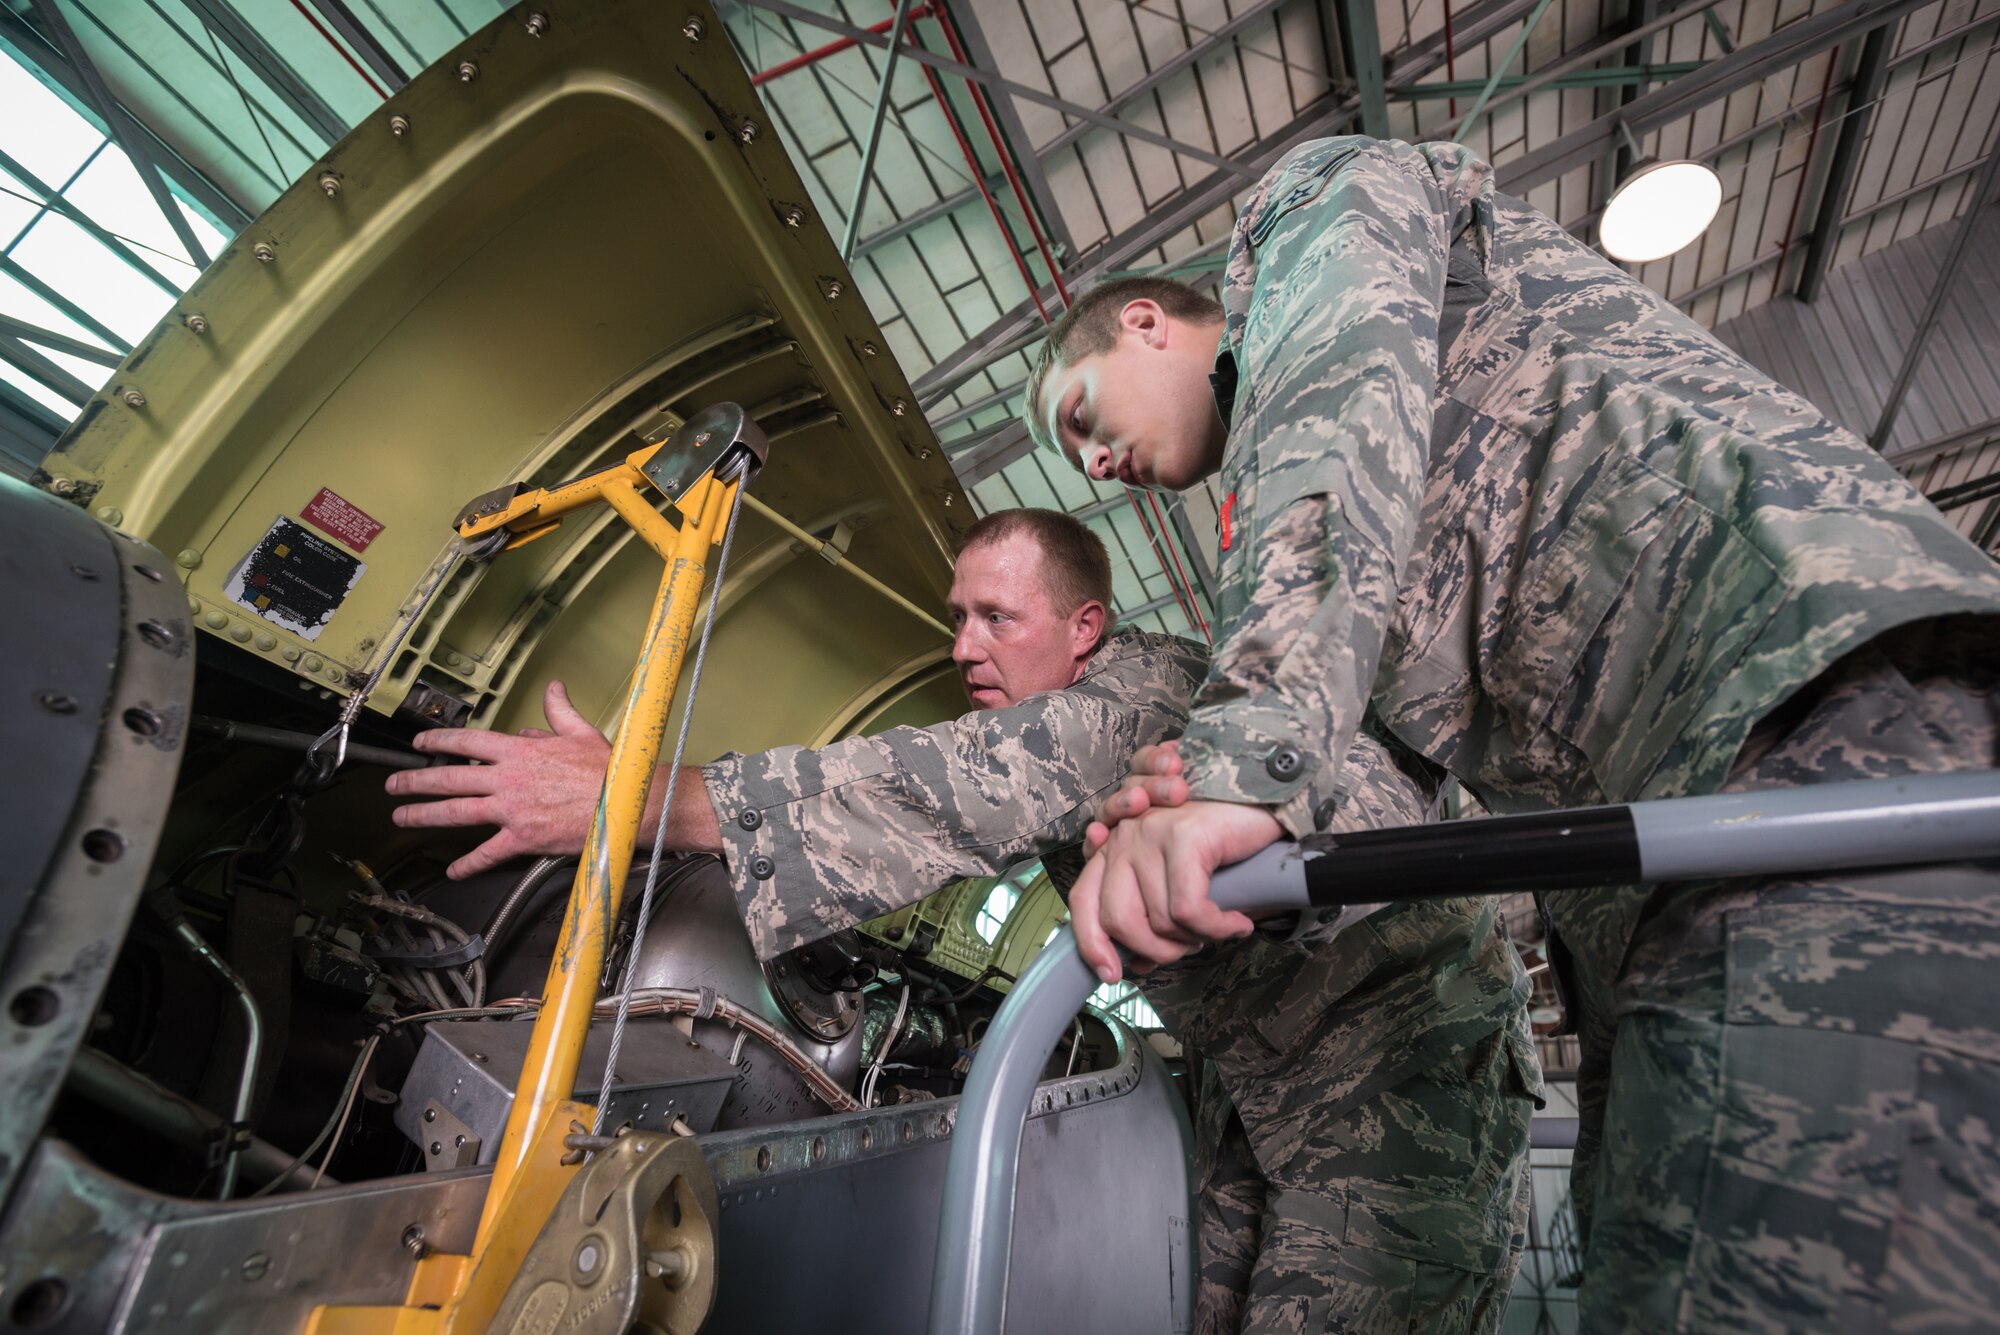 U.S. Air Force Tech. Sgt. Patrick Howard (left), and electrician from the Kentucky Air National Guard’s 123rd Airlift Wing, teaches U.S. Air Force Airman 1st Class Ethan Sartin, also from the 123rd, how to remove an electrical generator from a C-130 engine at the Air National Guard’s Air Dominance Center in Savannah, Ga., June 14, 2016. The class is part of Maintenance University here, a weeklong course designed to provide intensive instruction in aircraft maintenance. Now in its eighth year, Maintenance University is sponsored by the 123rd Airlift Wing. (U.S. Air National Guard photo by Lt. Col. Dale Greer)